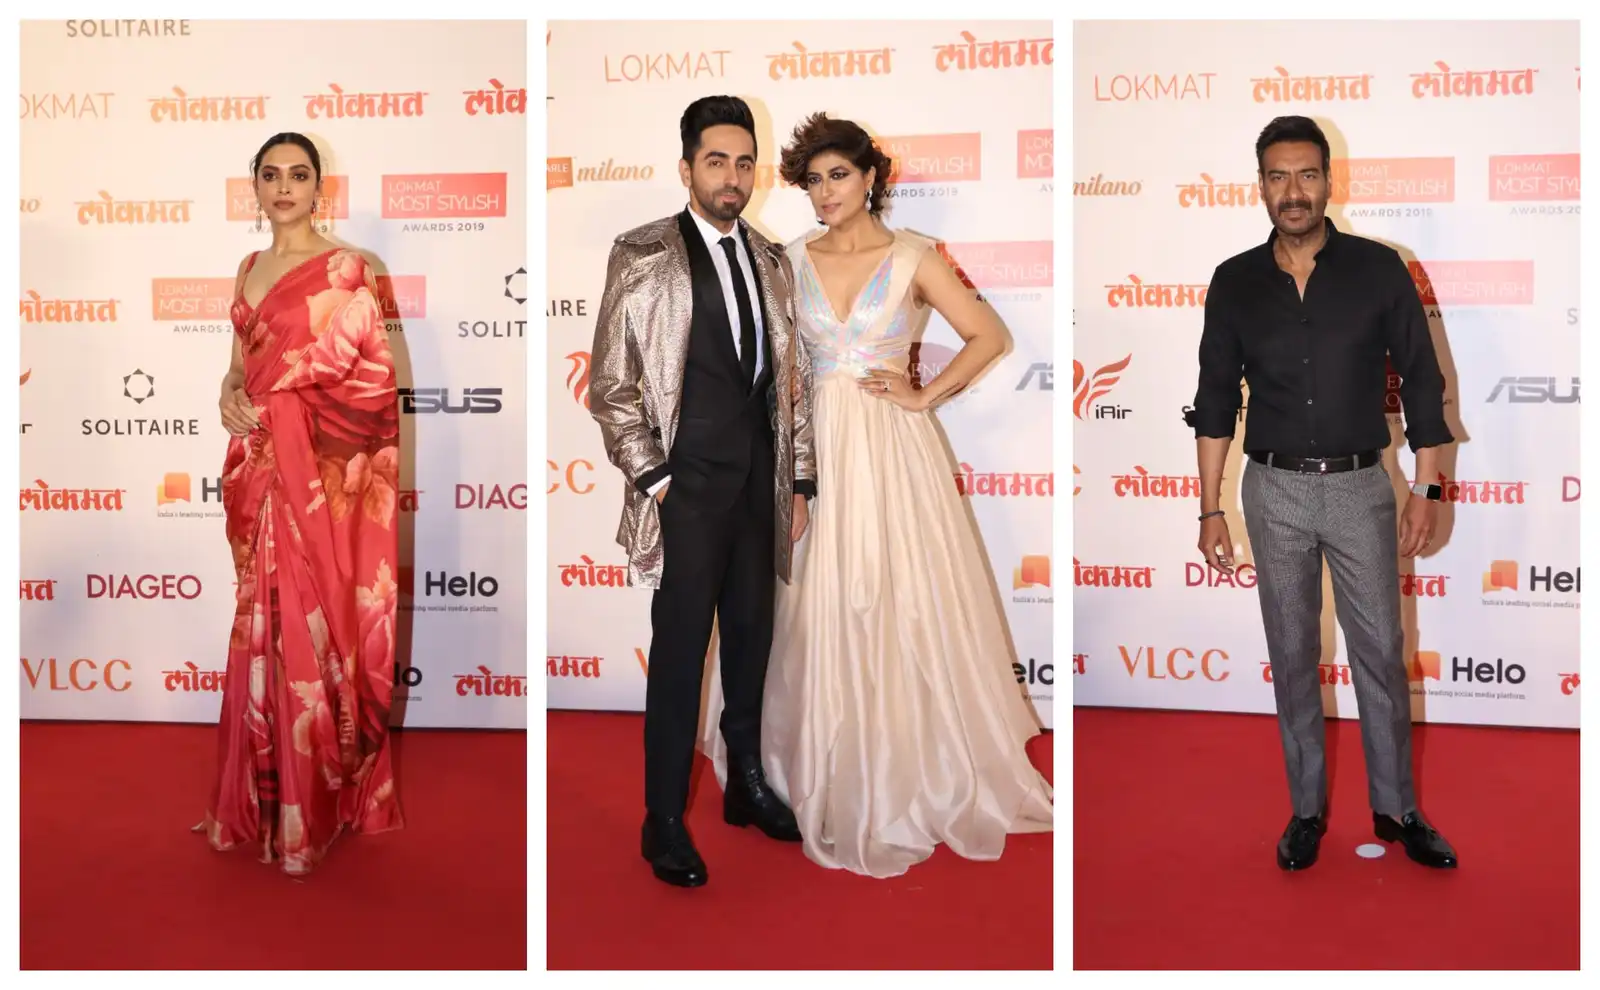 Deepika, Ayushmann And Other Bollywood Celebs Look Runway Ready For Lokmat Most Stylish Award